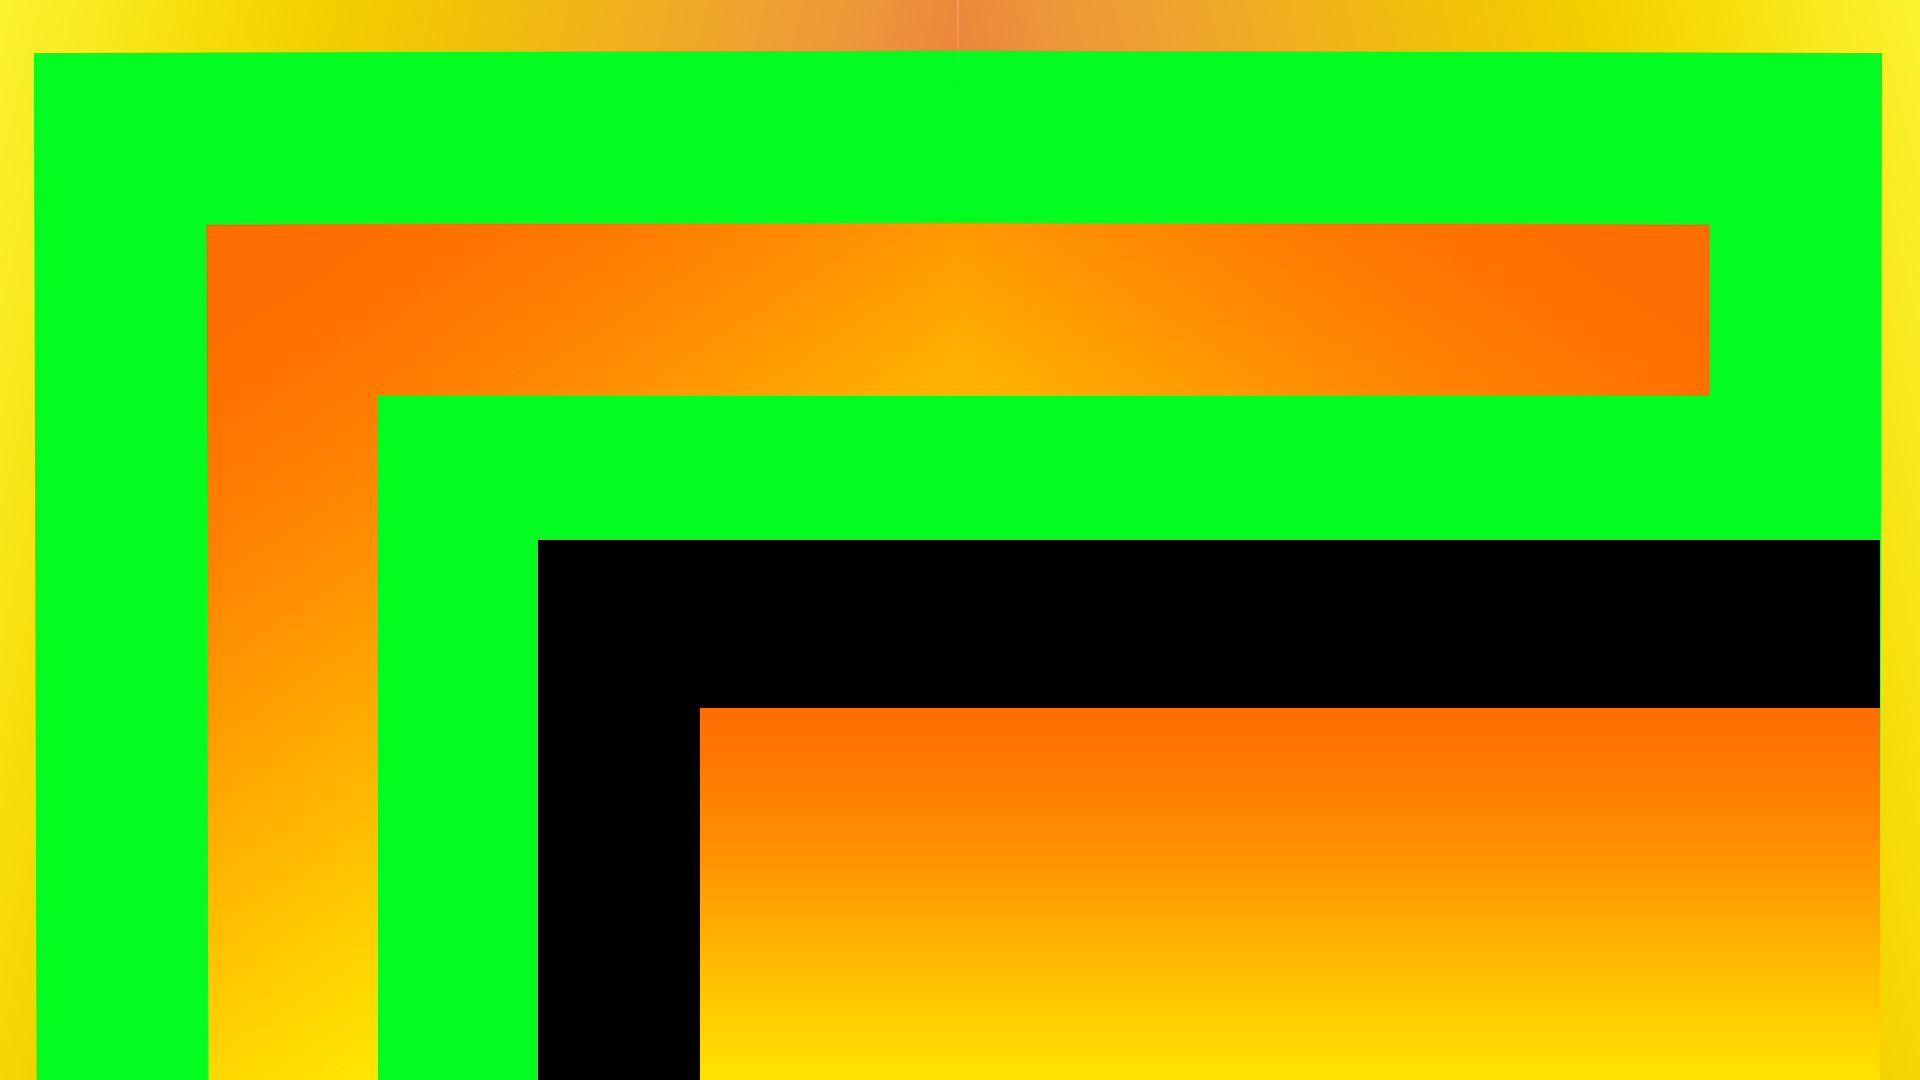 Abstract Colorful Digital Art Geometry Rectangle Shapes 1920x1080